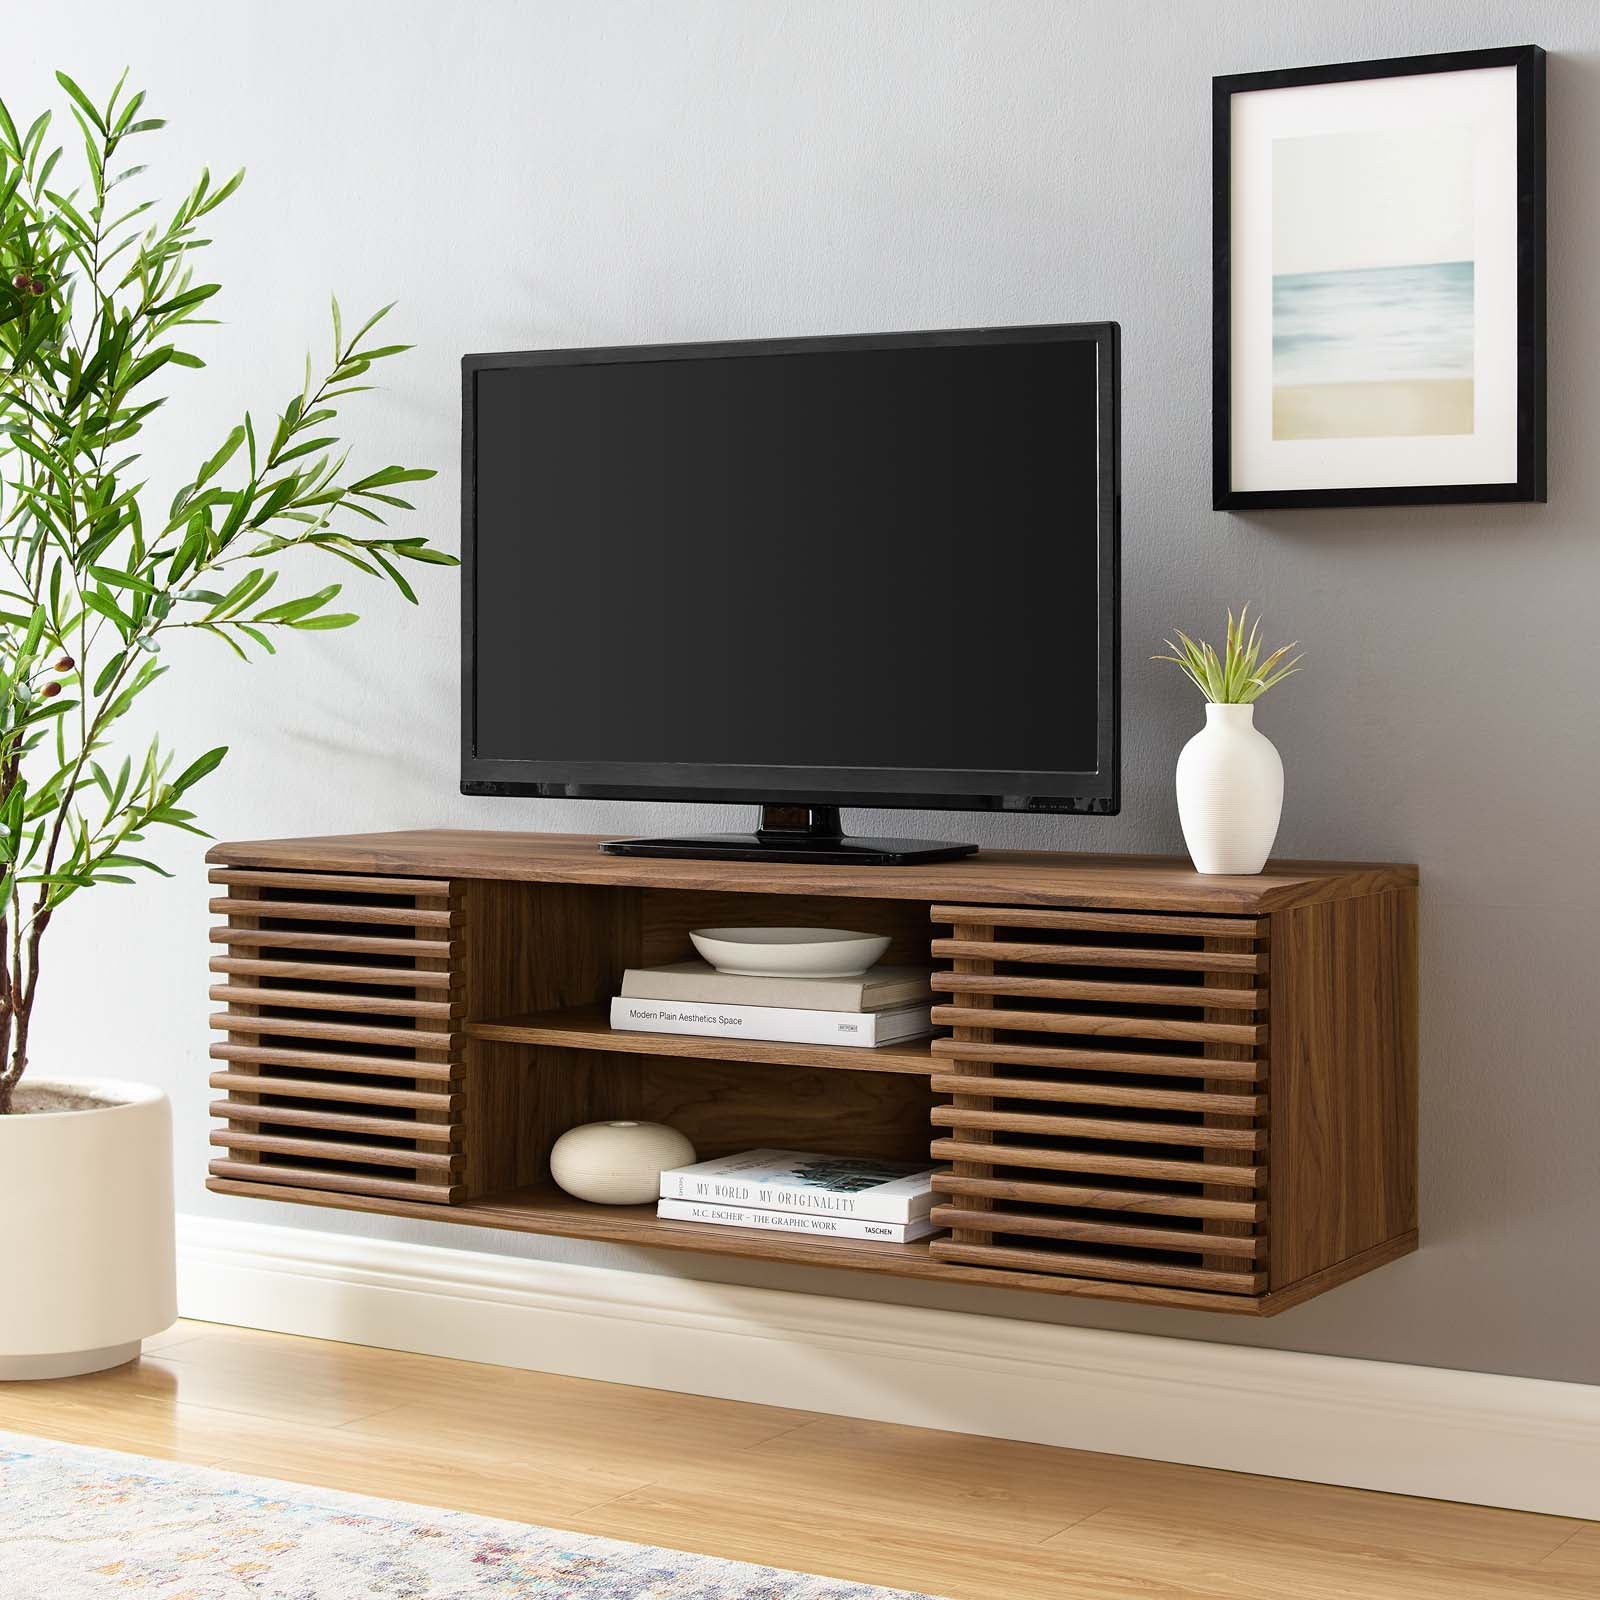 Render 46" Wall-Mount Media Console TV Stand